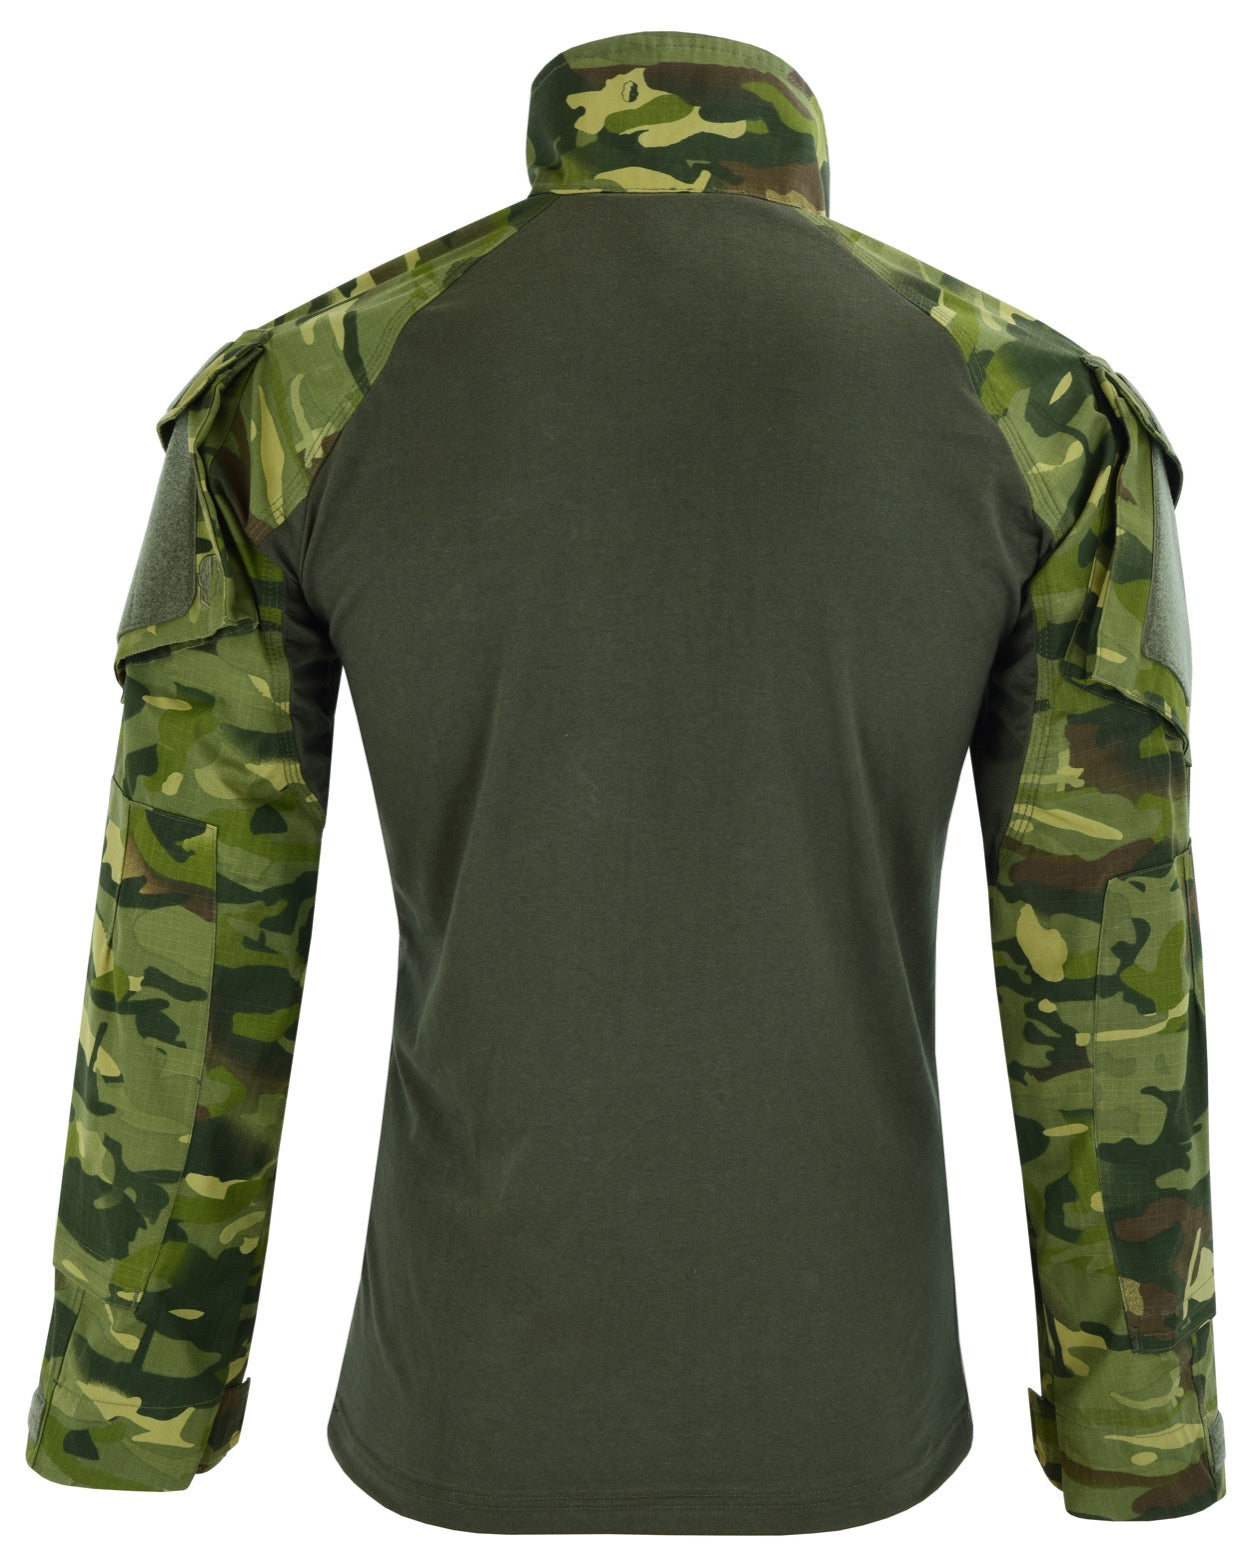 Tactical Zone HYBRID TACTICAL SHIRT IS A PERFECT COMBAT SHIRT Colour  UTP-Temperate Back